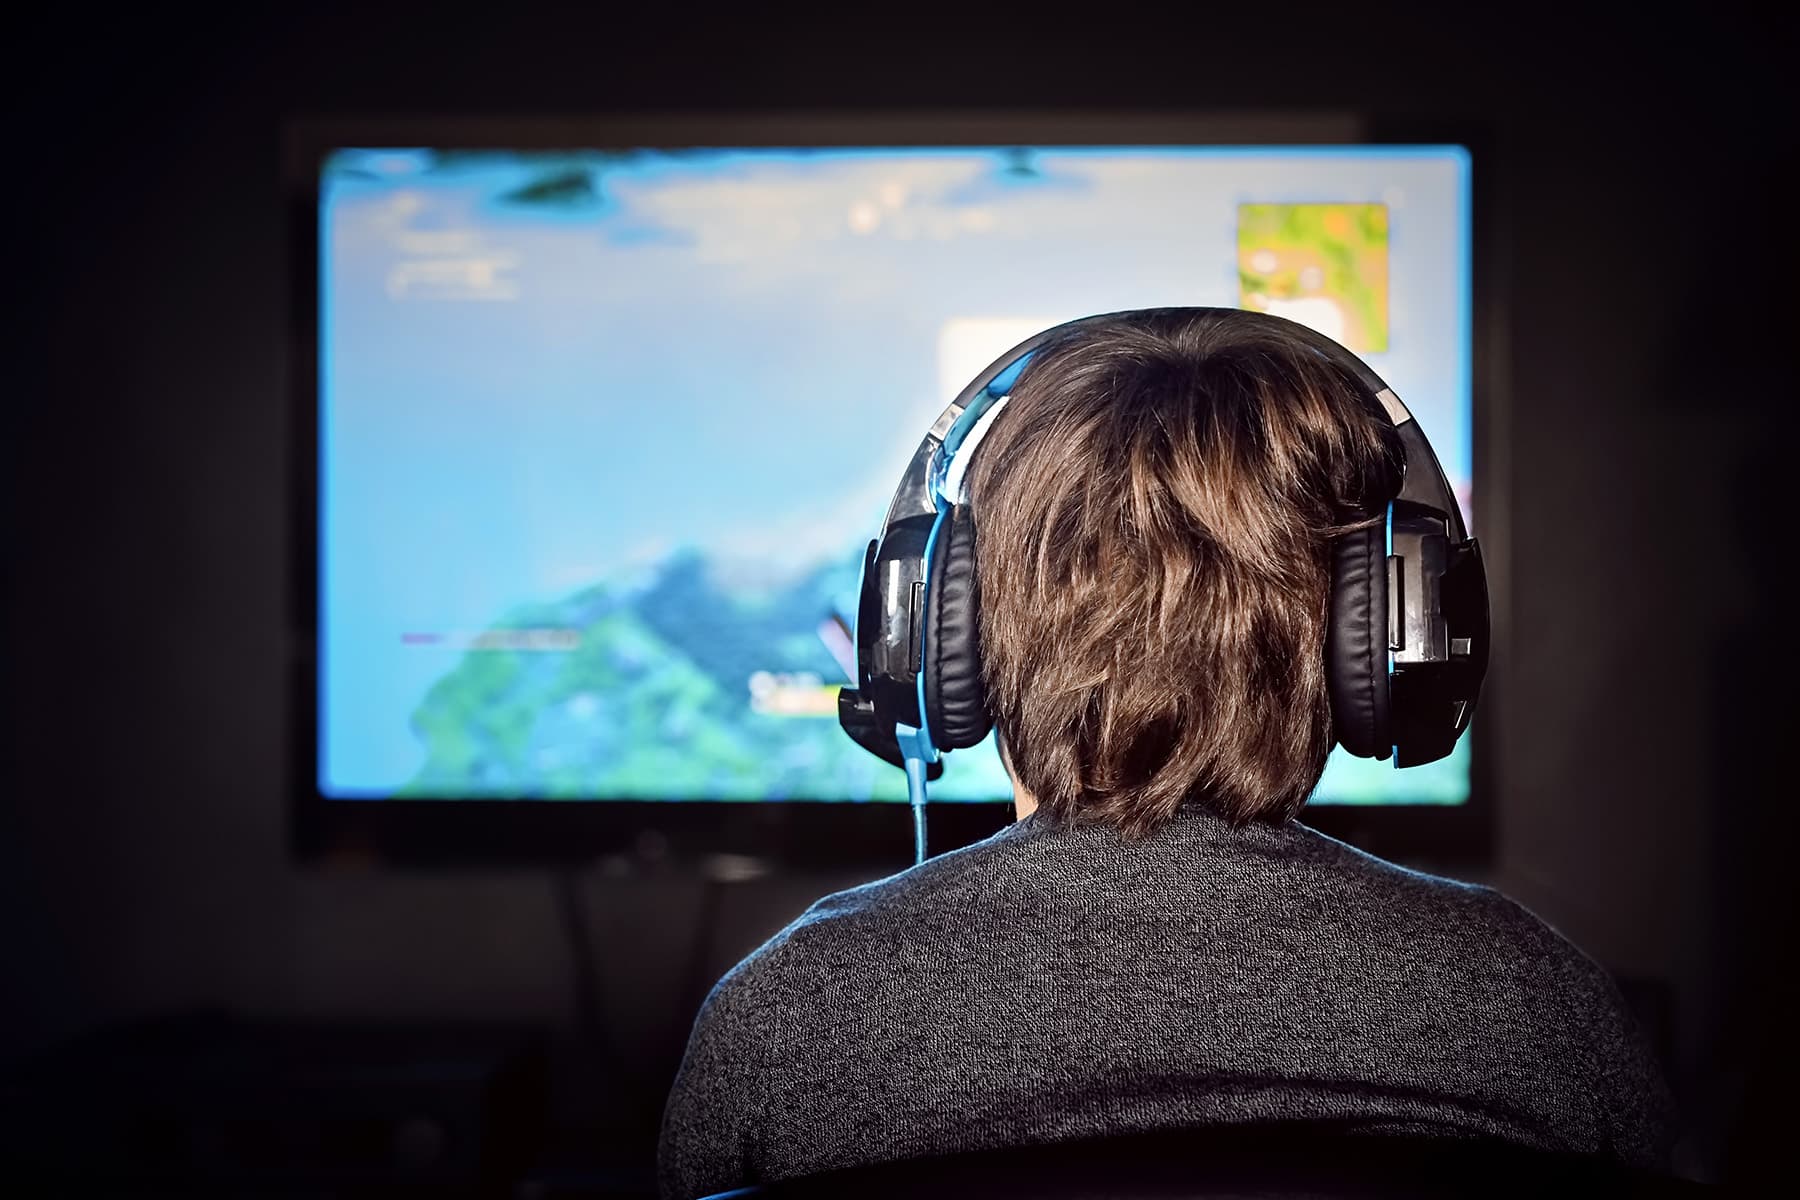 Video Game Addiction: Noticing Warning Signs, Getting Help thumbnail